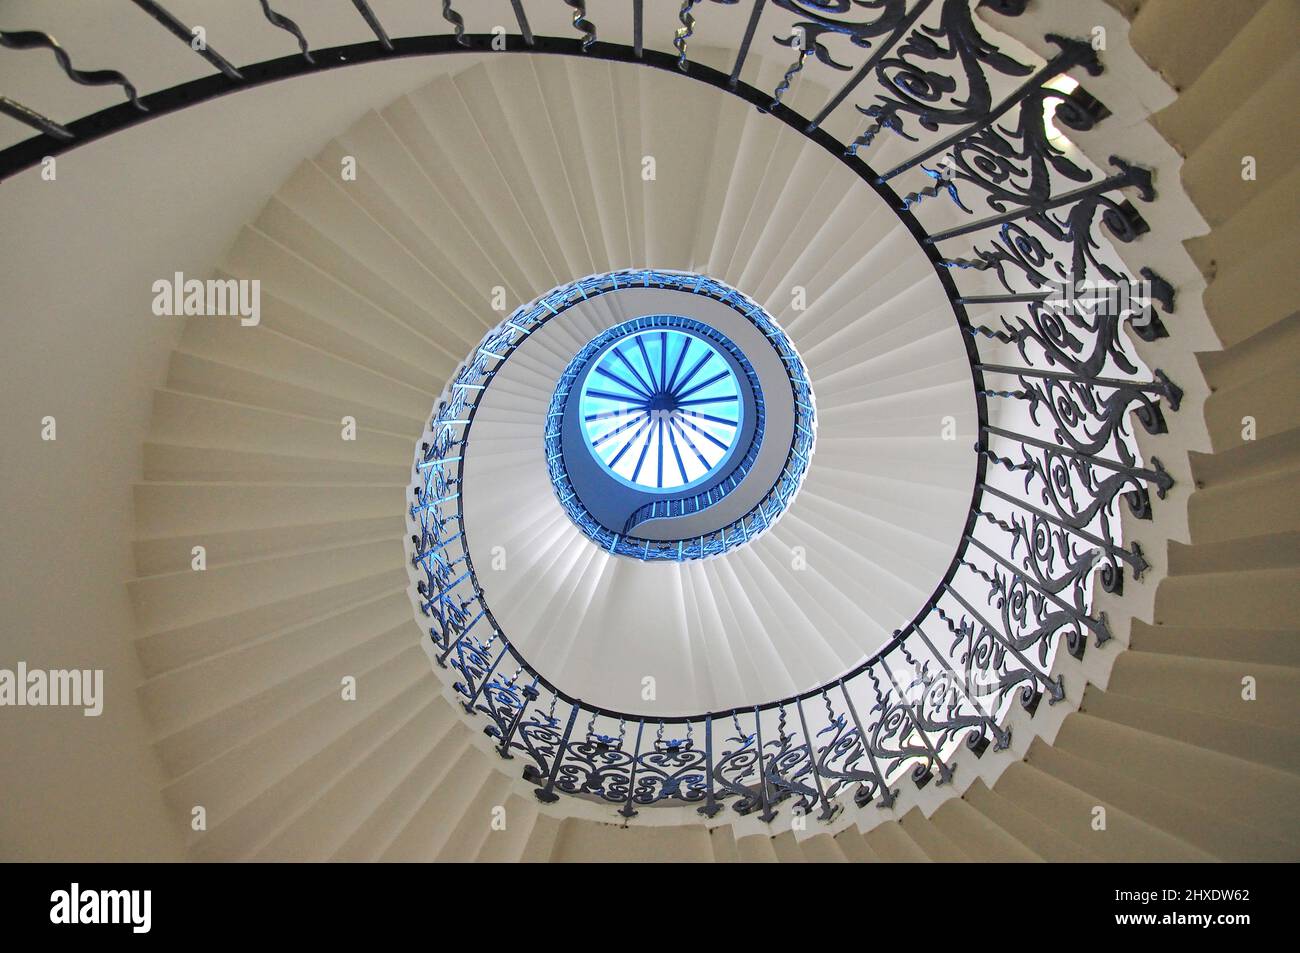 Spiral staircase, The Queen's House, Greenwich, London Borough of Greenwich, Greater London, England, United Kingdom Stock Photo